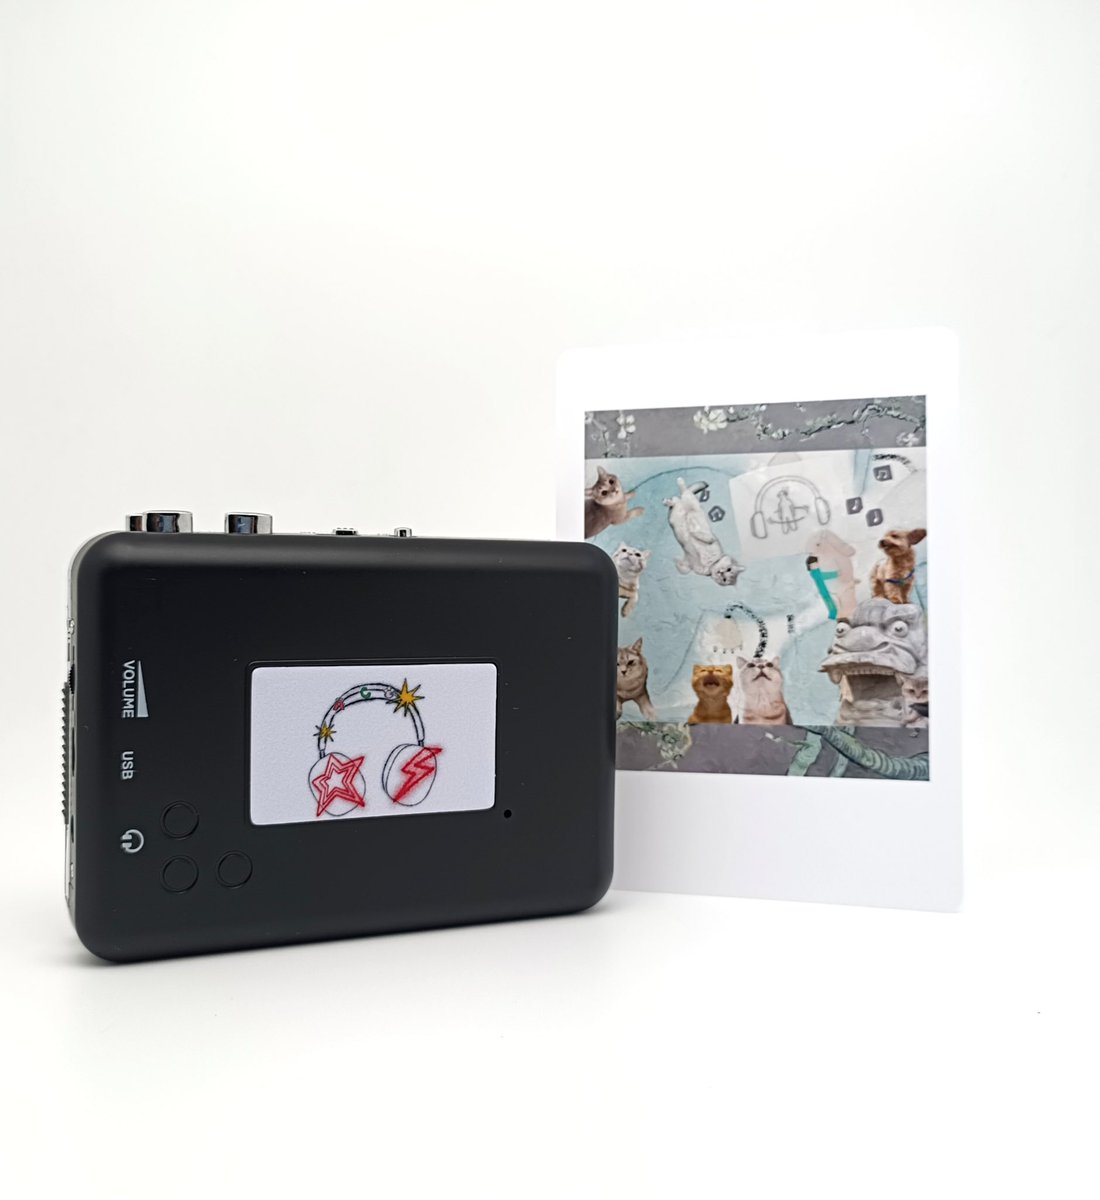 🐾 Tune in with a twist! This custom tape player lets you press play on your favorite tracks with a dash of animal charm. Perfect for music lovers with a wild streak! 🎶🐱🎧 #CustomAudio #AnimalTheme #MusicLovers